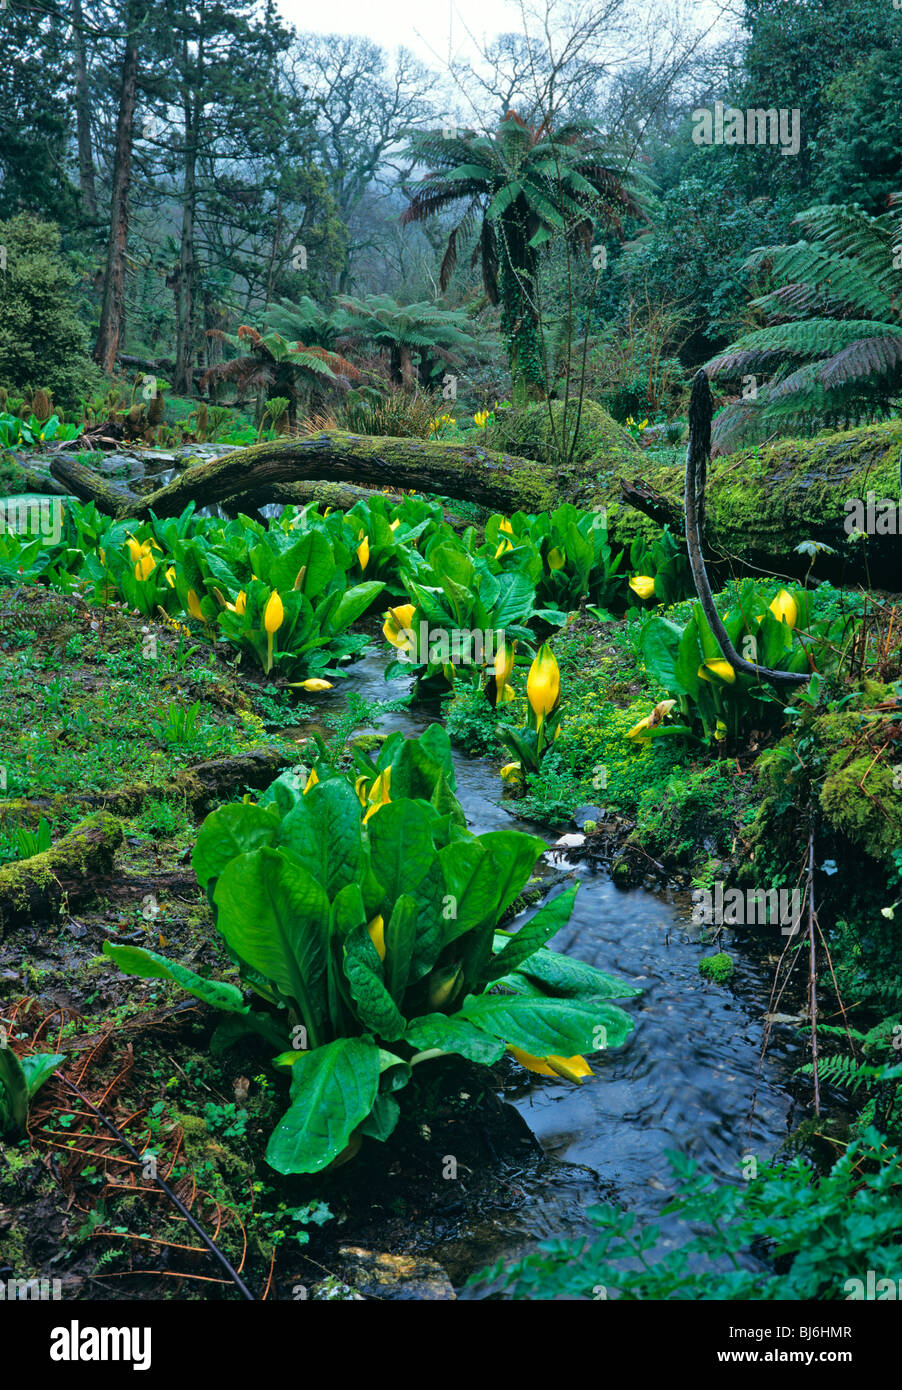 A view in the 'The Jungle' at the Lost gardens of Heligan with Skunk Cabbage growing in the bog area Stock Photo